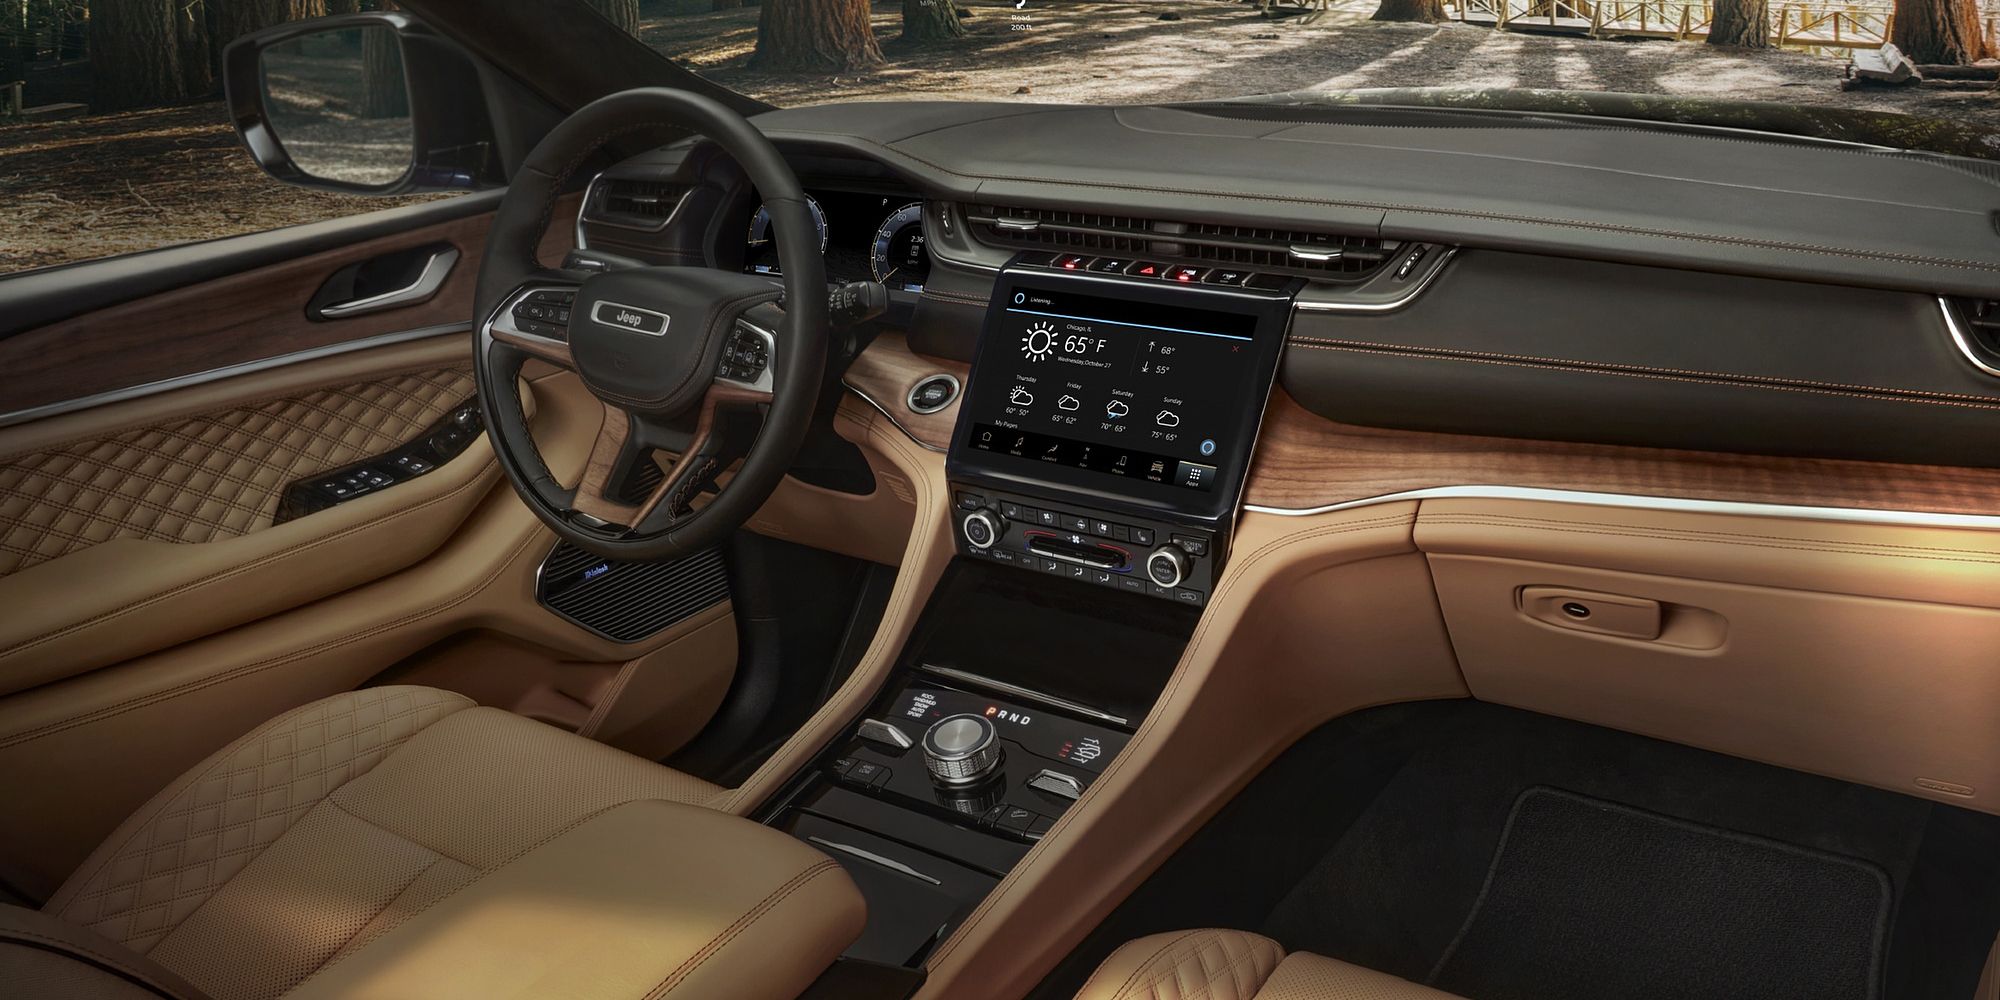 The cabin in the new Grand Cherokee